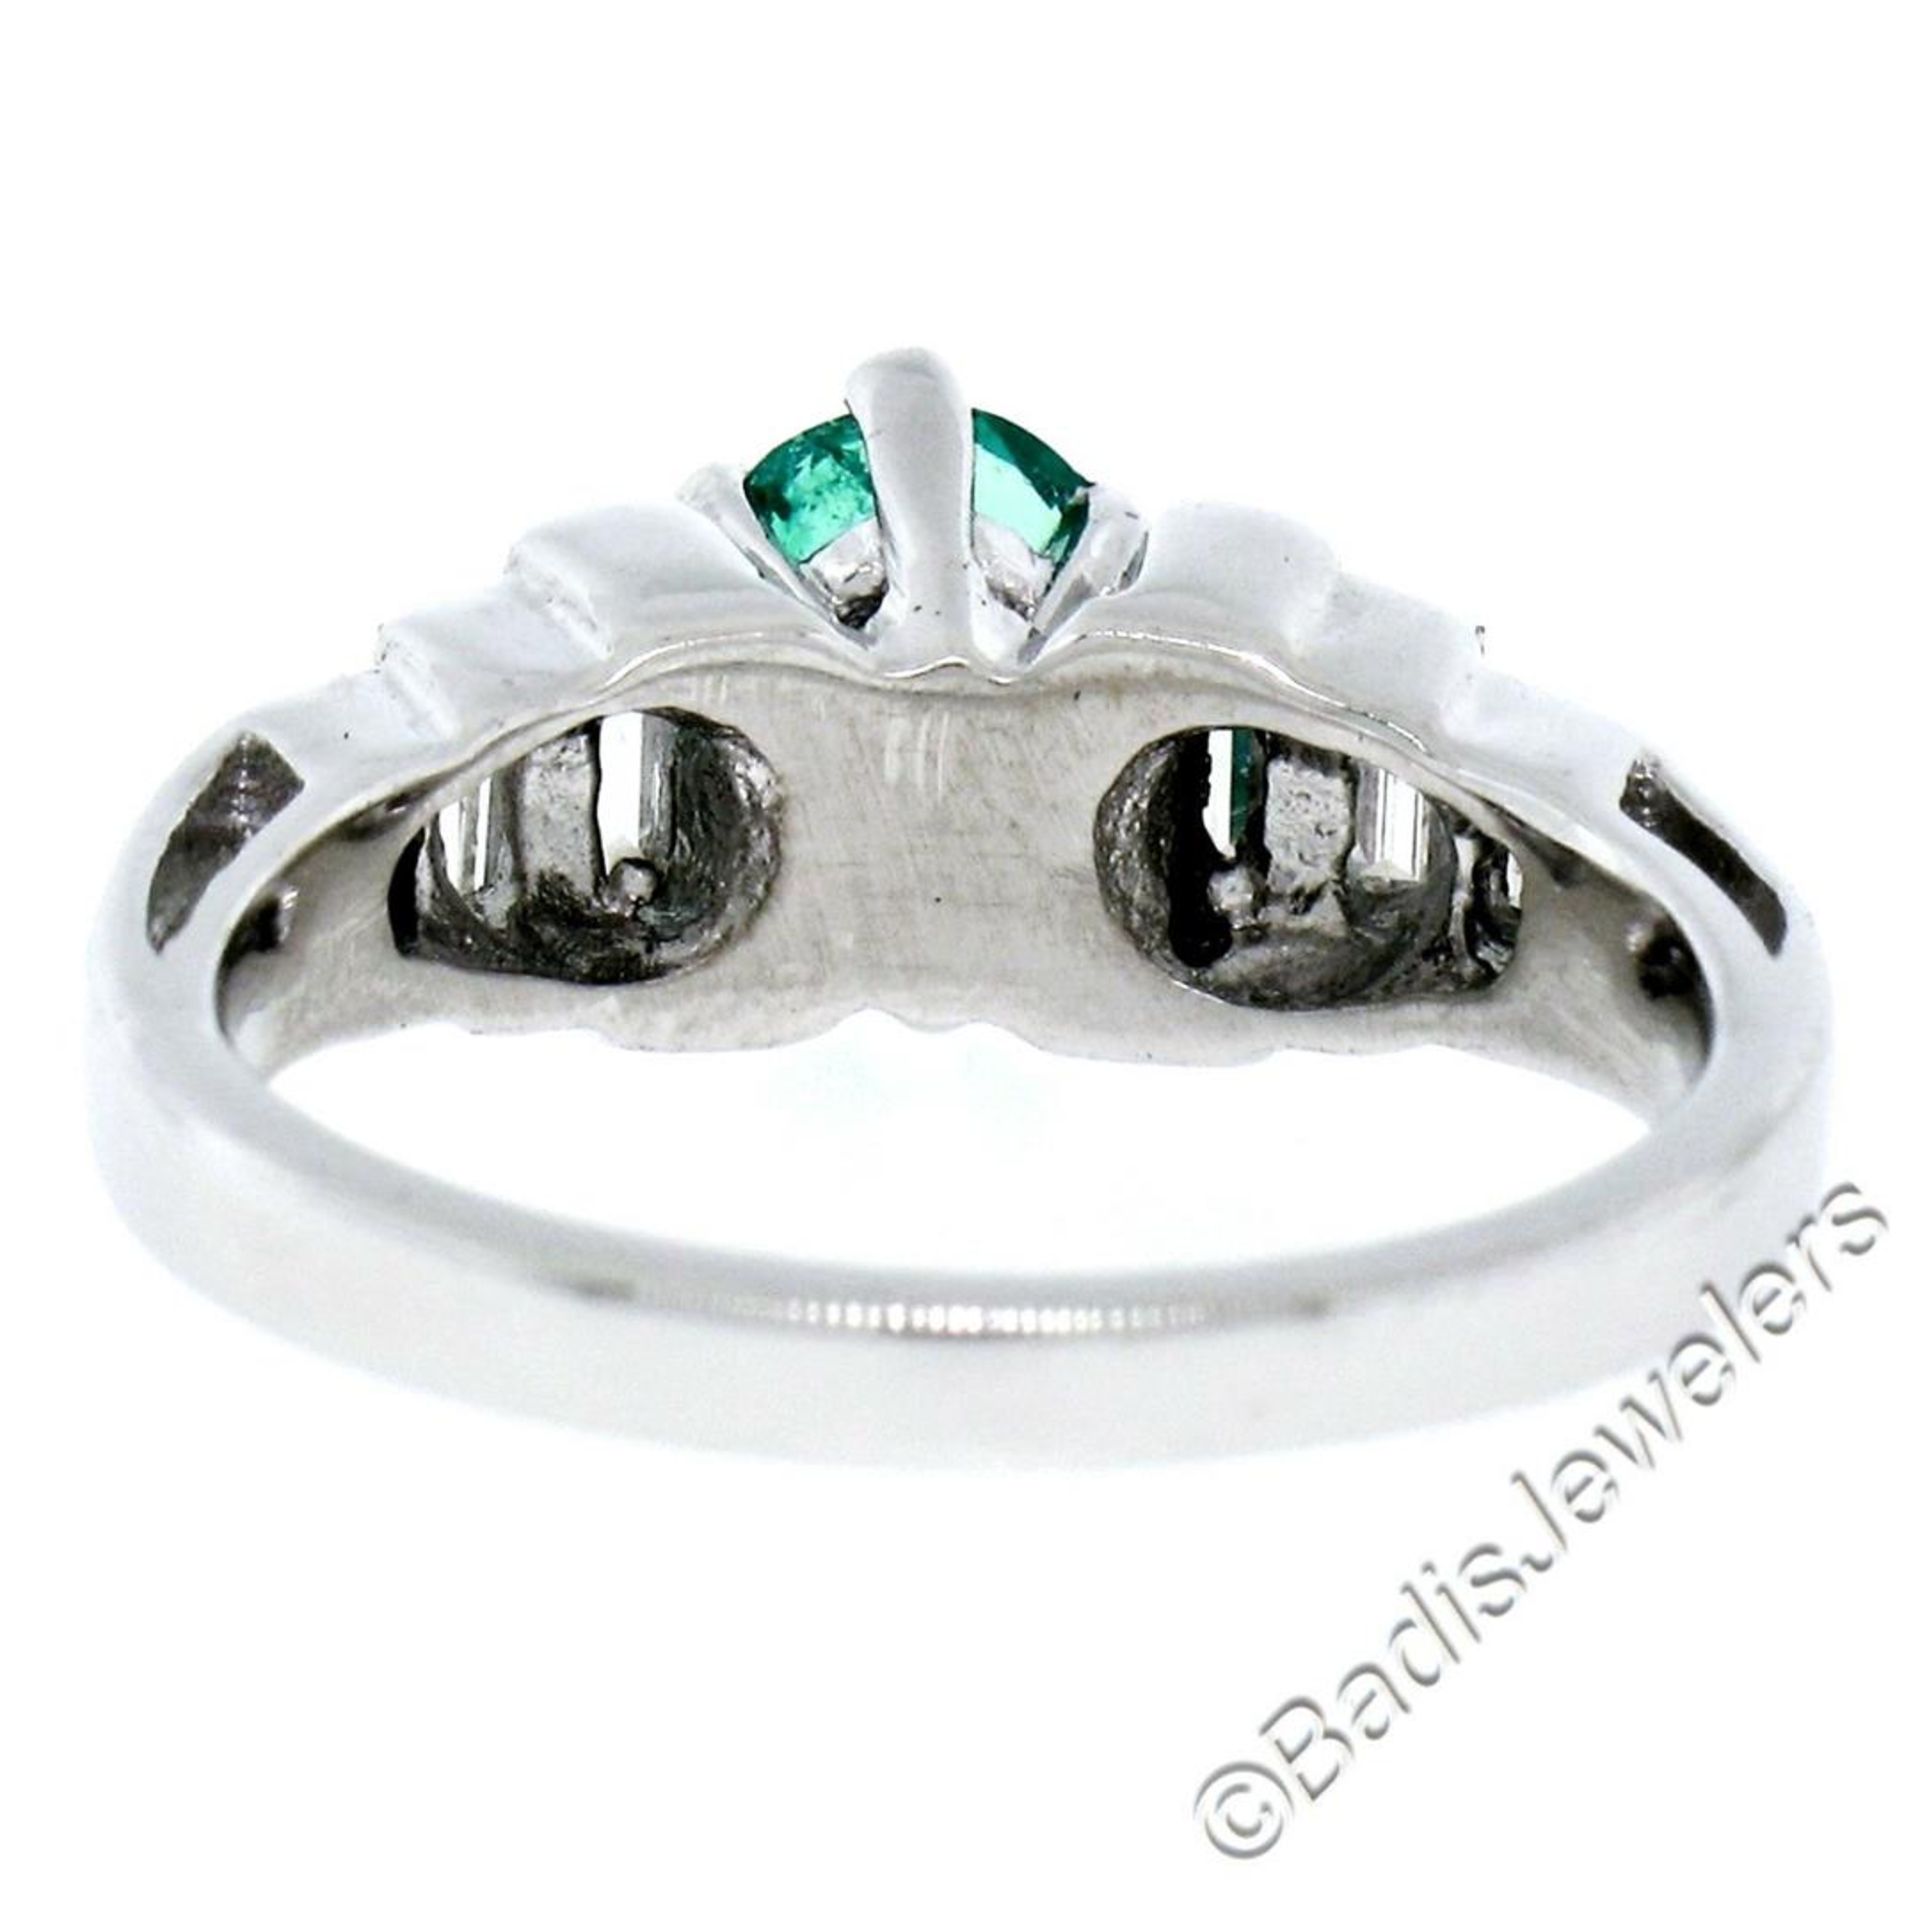 14kt White Gold 1.33ctw Emerald Solitaire and Baguette Diamond Step Ring - Image 5 of 9